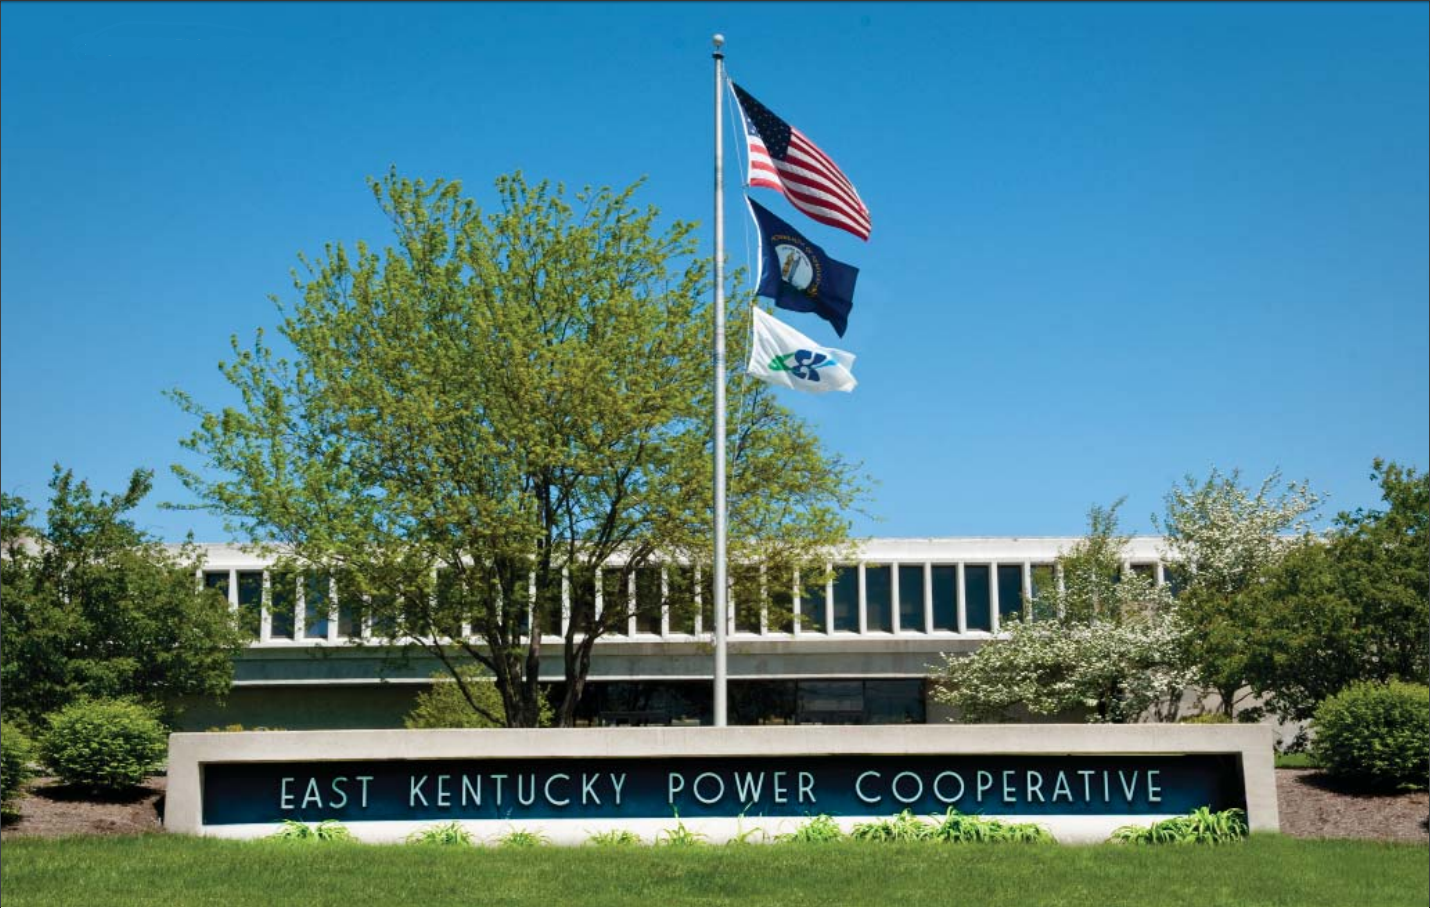 East Kentucky Power Cooperative (EKPC) delivers power to more than 520,000 homes and businesses.